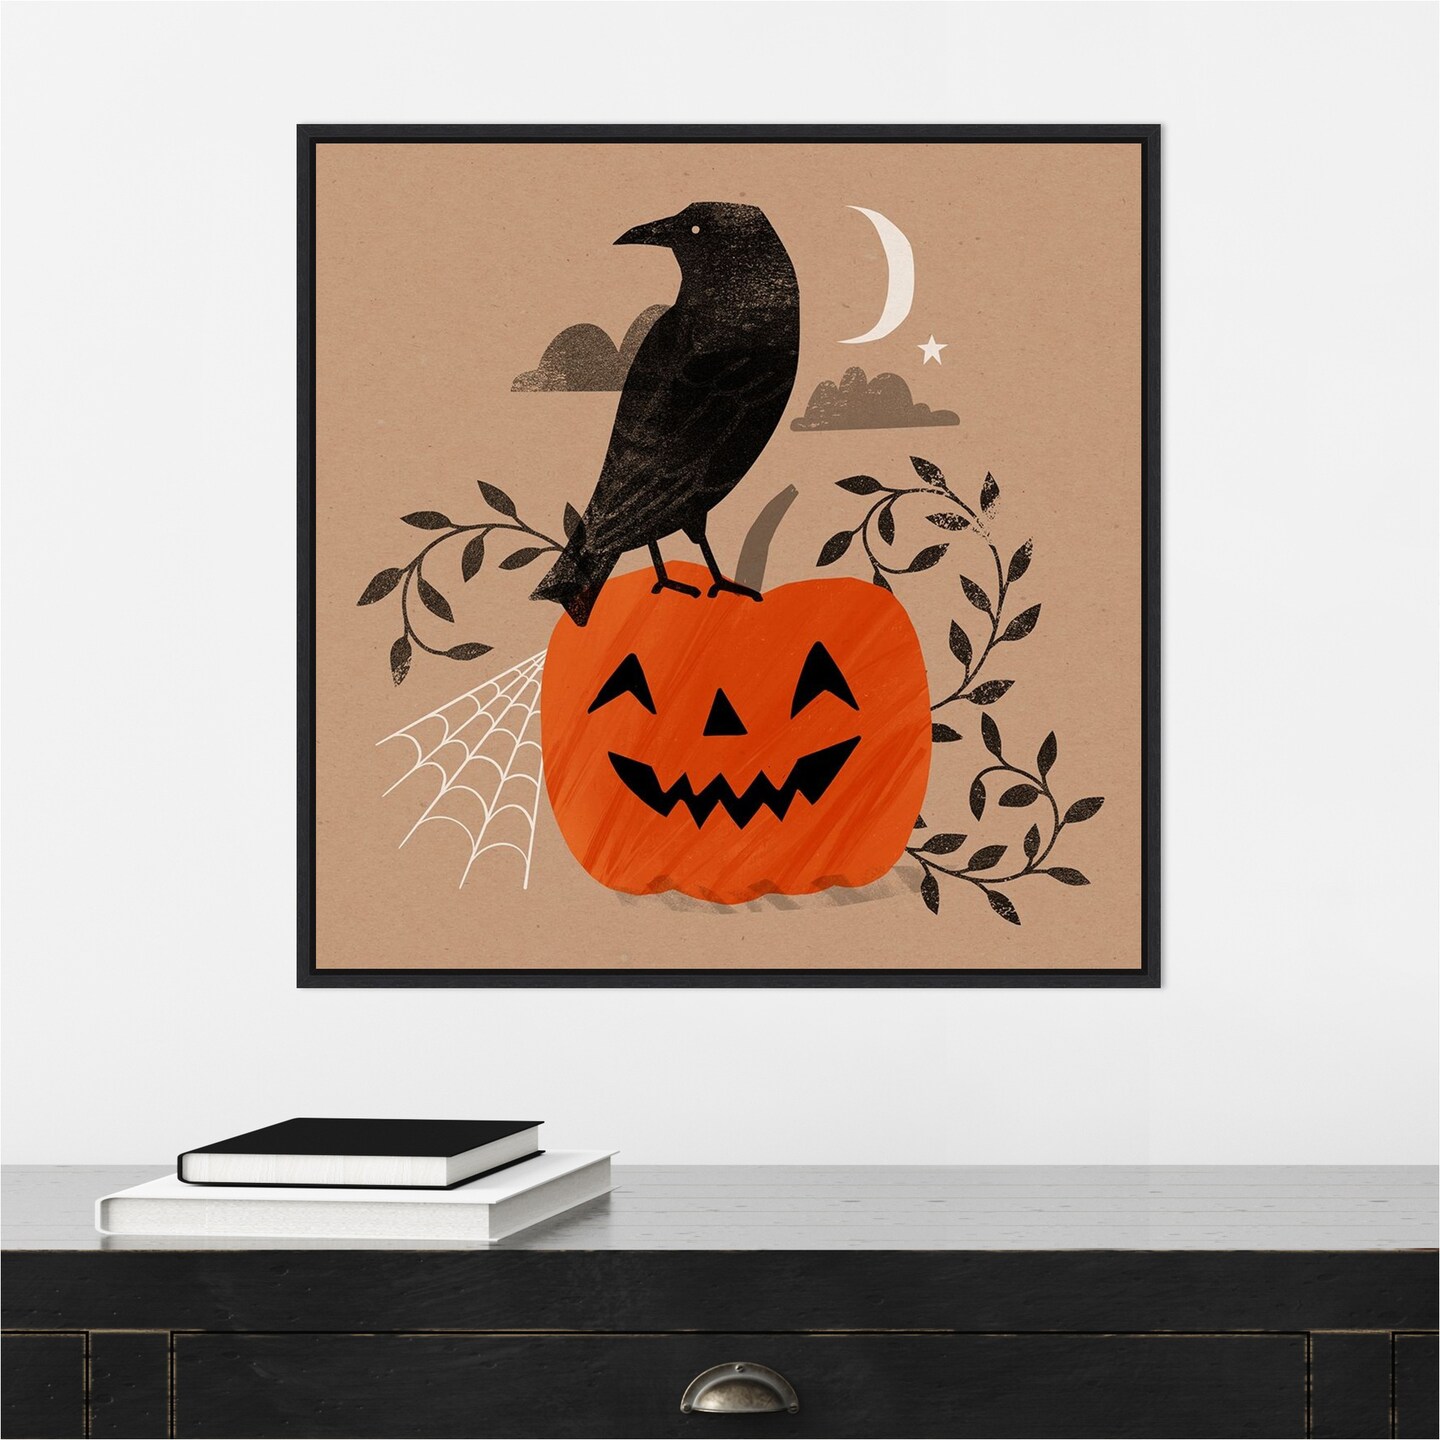 Halloween Crow Graphic II by Victoria Barnes 22-in. W x 22-in. H. Canvas Wall Art Print Framed in Black